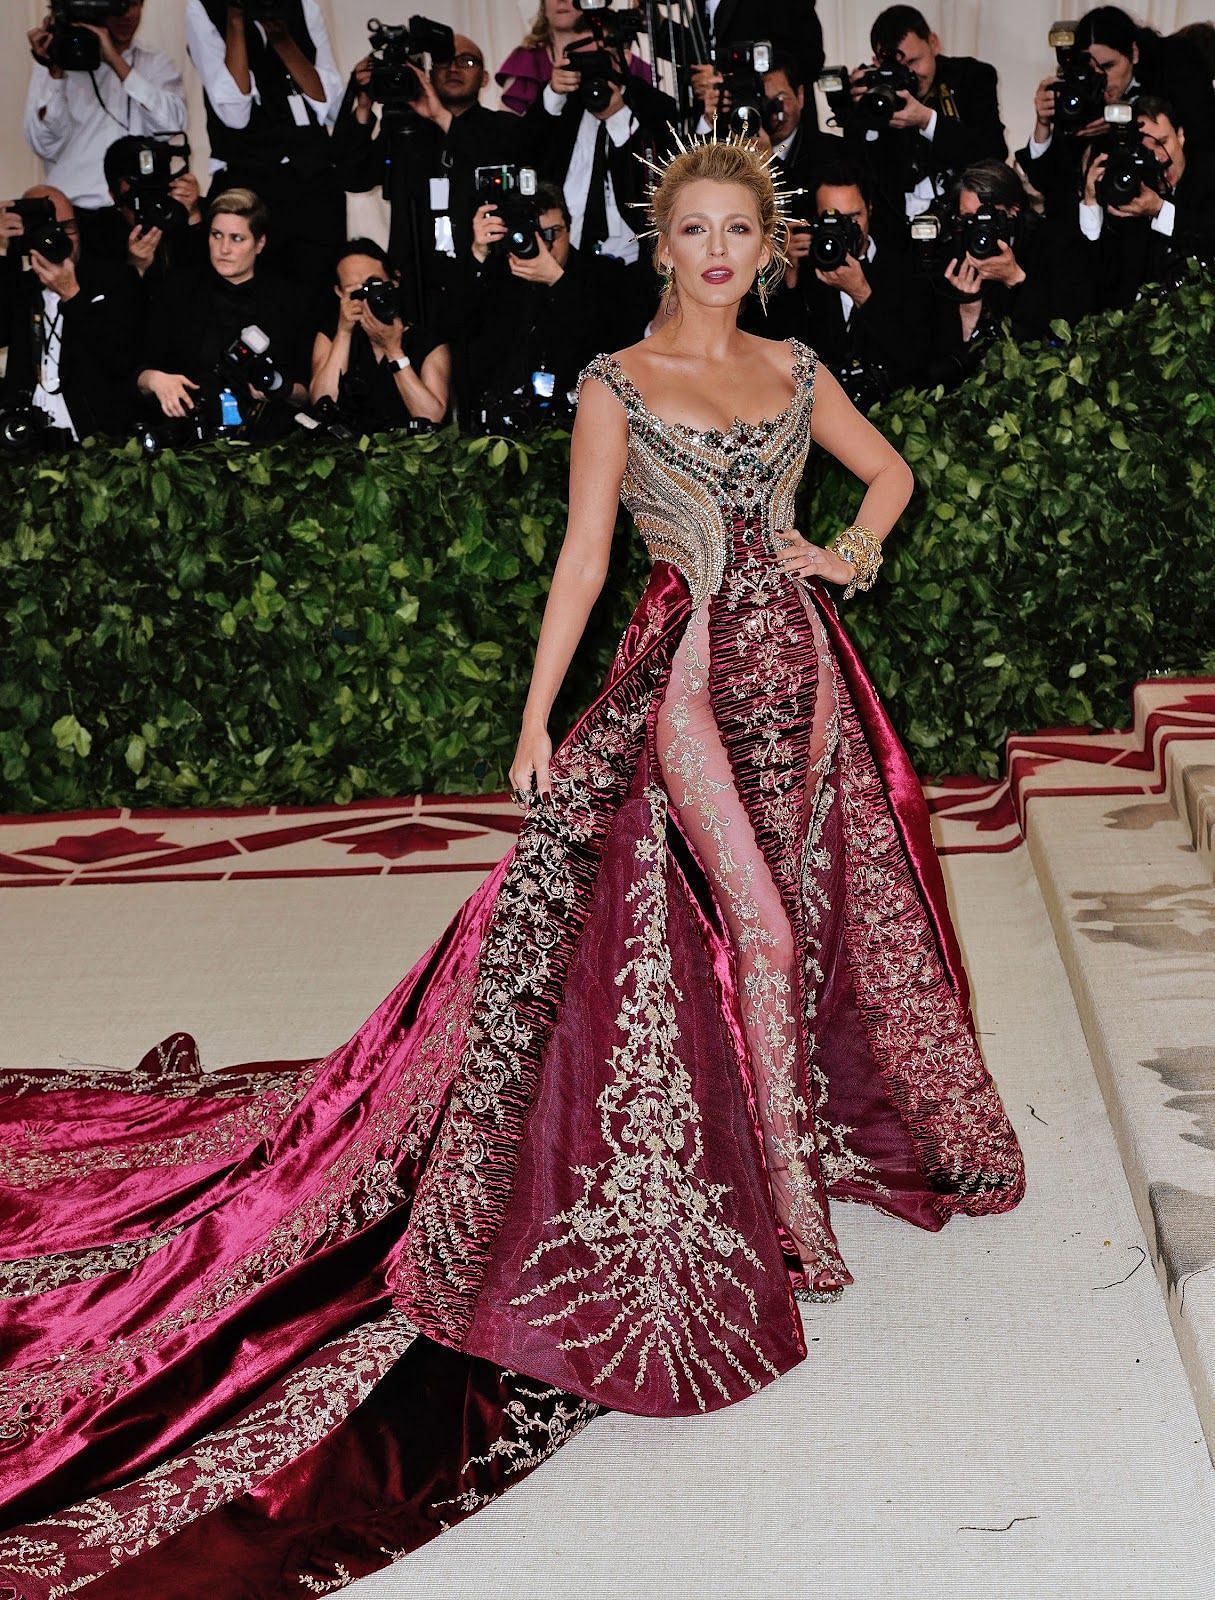 Who are the 2023 Met Gala co-chairs?